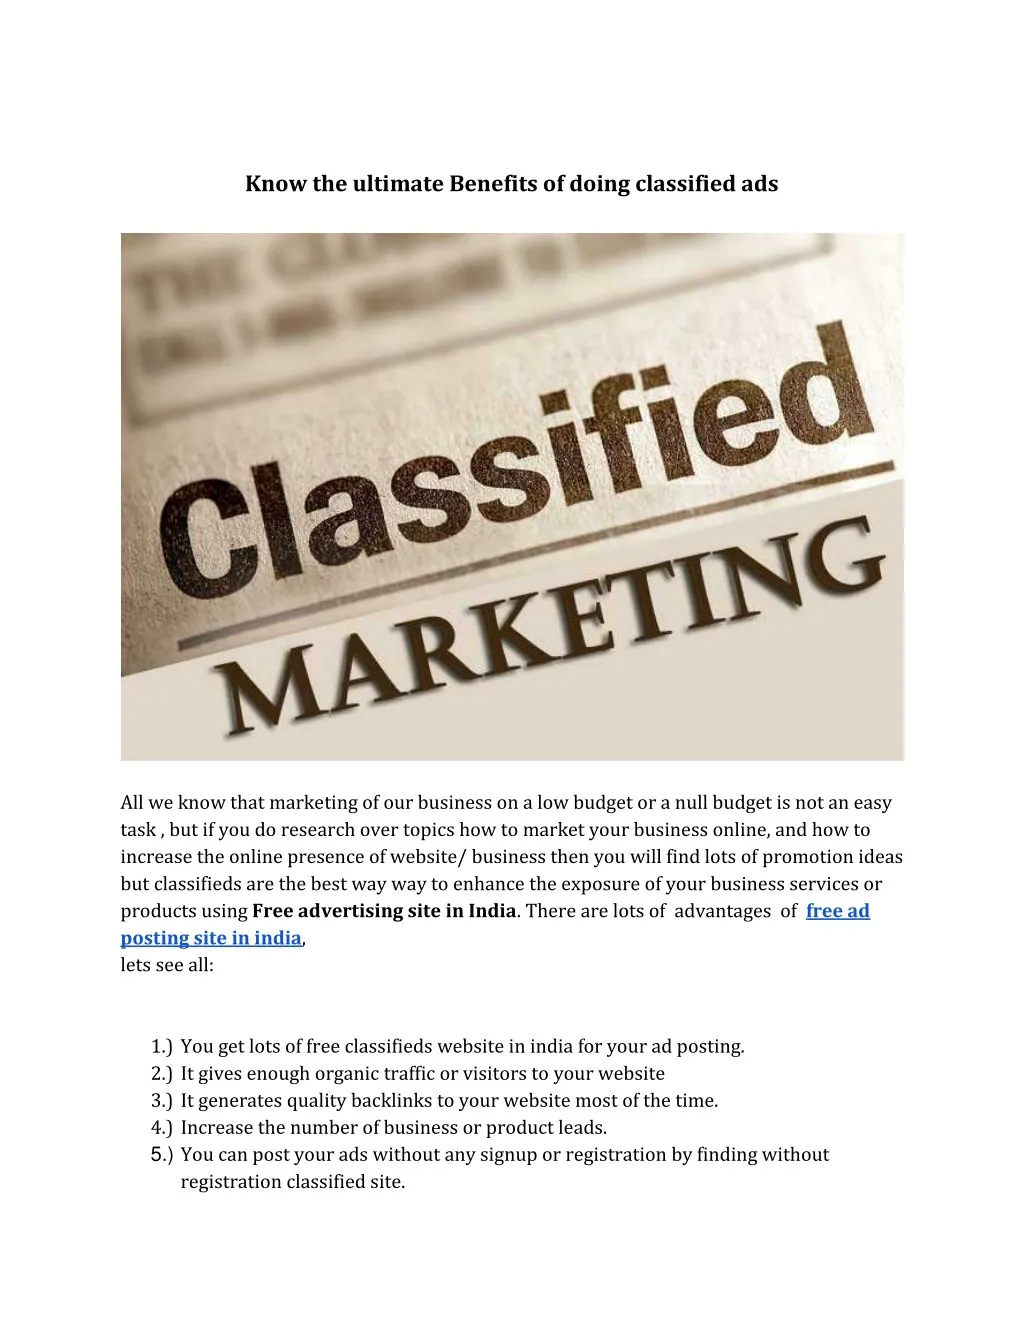 know the ultimate benefits of doing classified ads